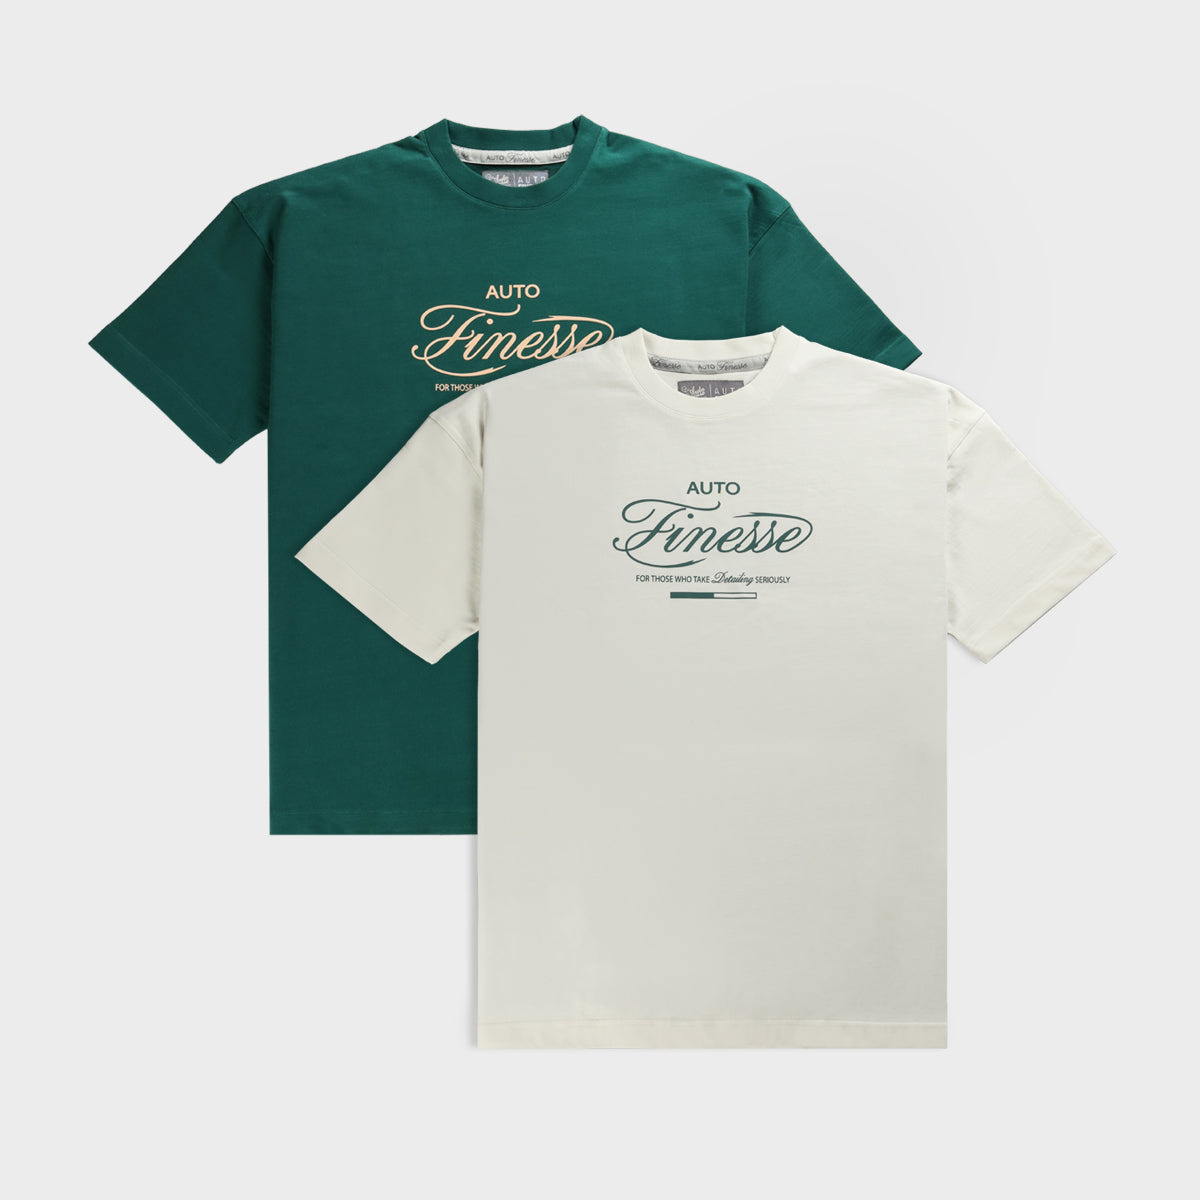 Auto Finesse | Car Detailing Products | Serious Detailers T-Shirt